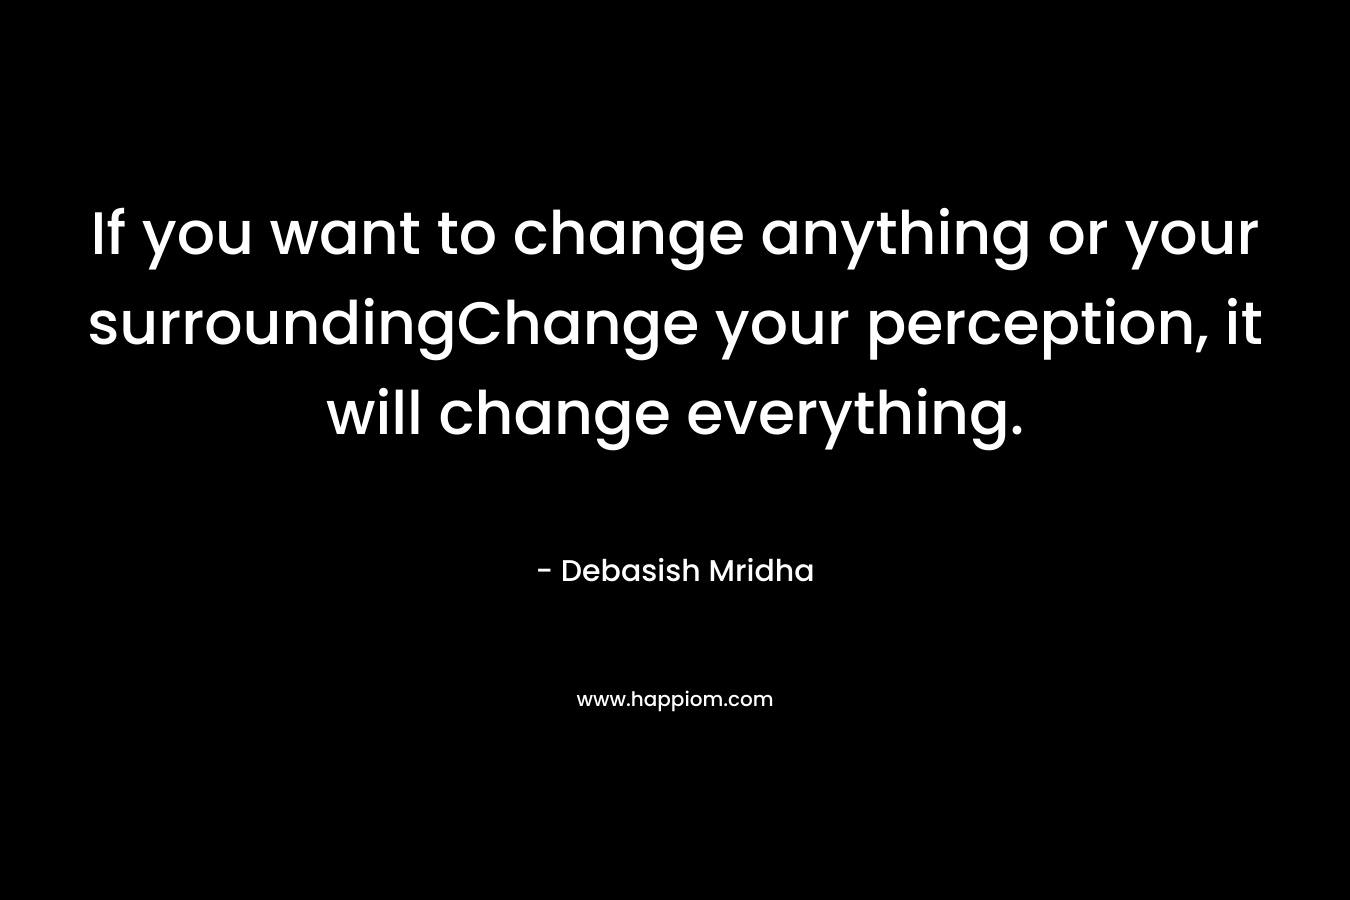 If you want to change anything or your surroundingChange your perception, it will change everything.